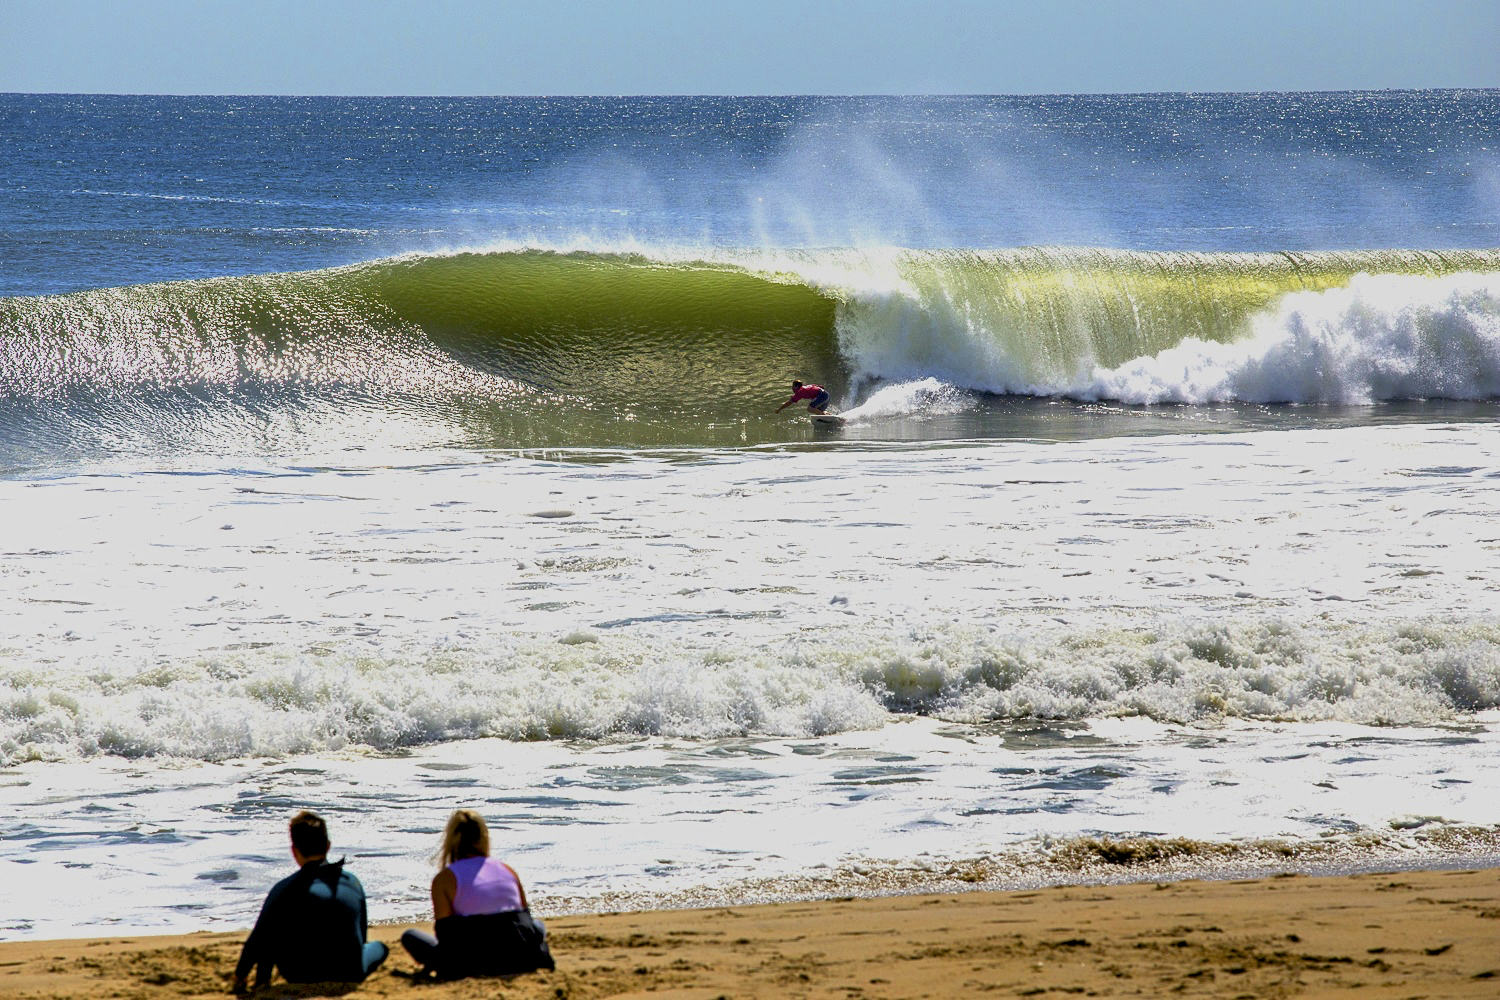 The Belmar Pro – dedicated to Scott Goodwin – is back baby with a very probable, very possibly hard thumping swell on the horizon from the future Mr. Hurricane Larry. Thanks Scotty!